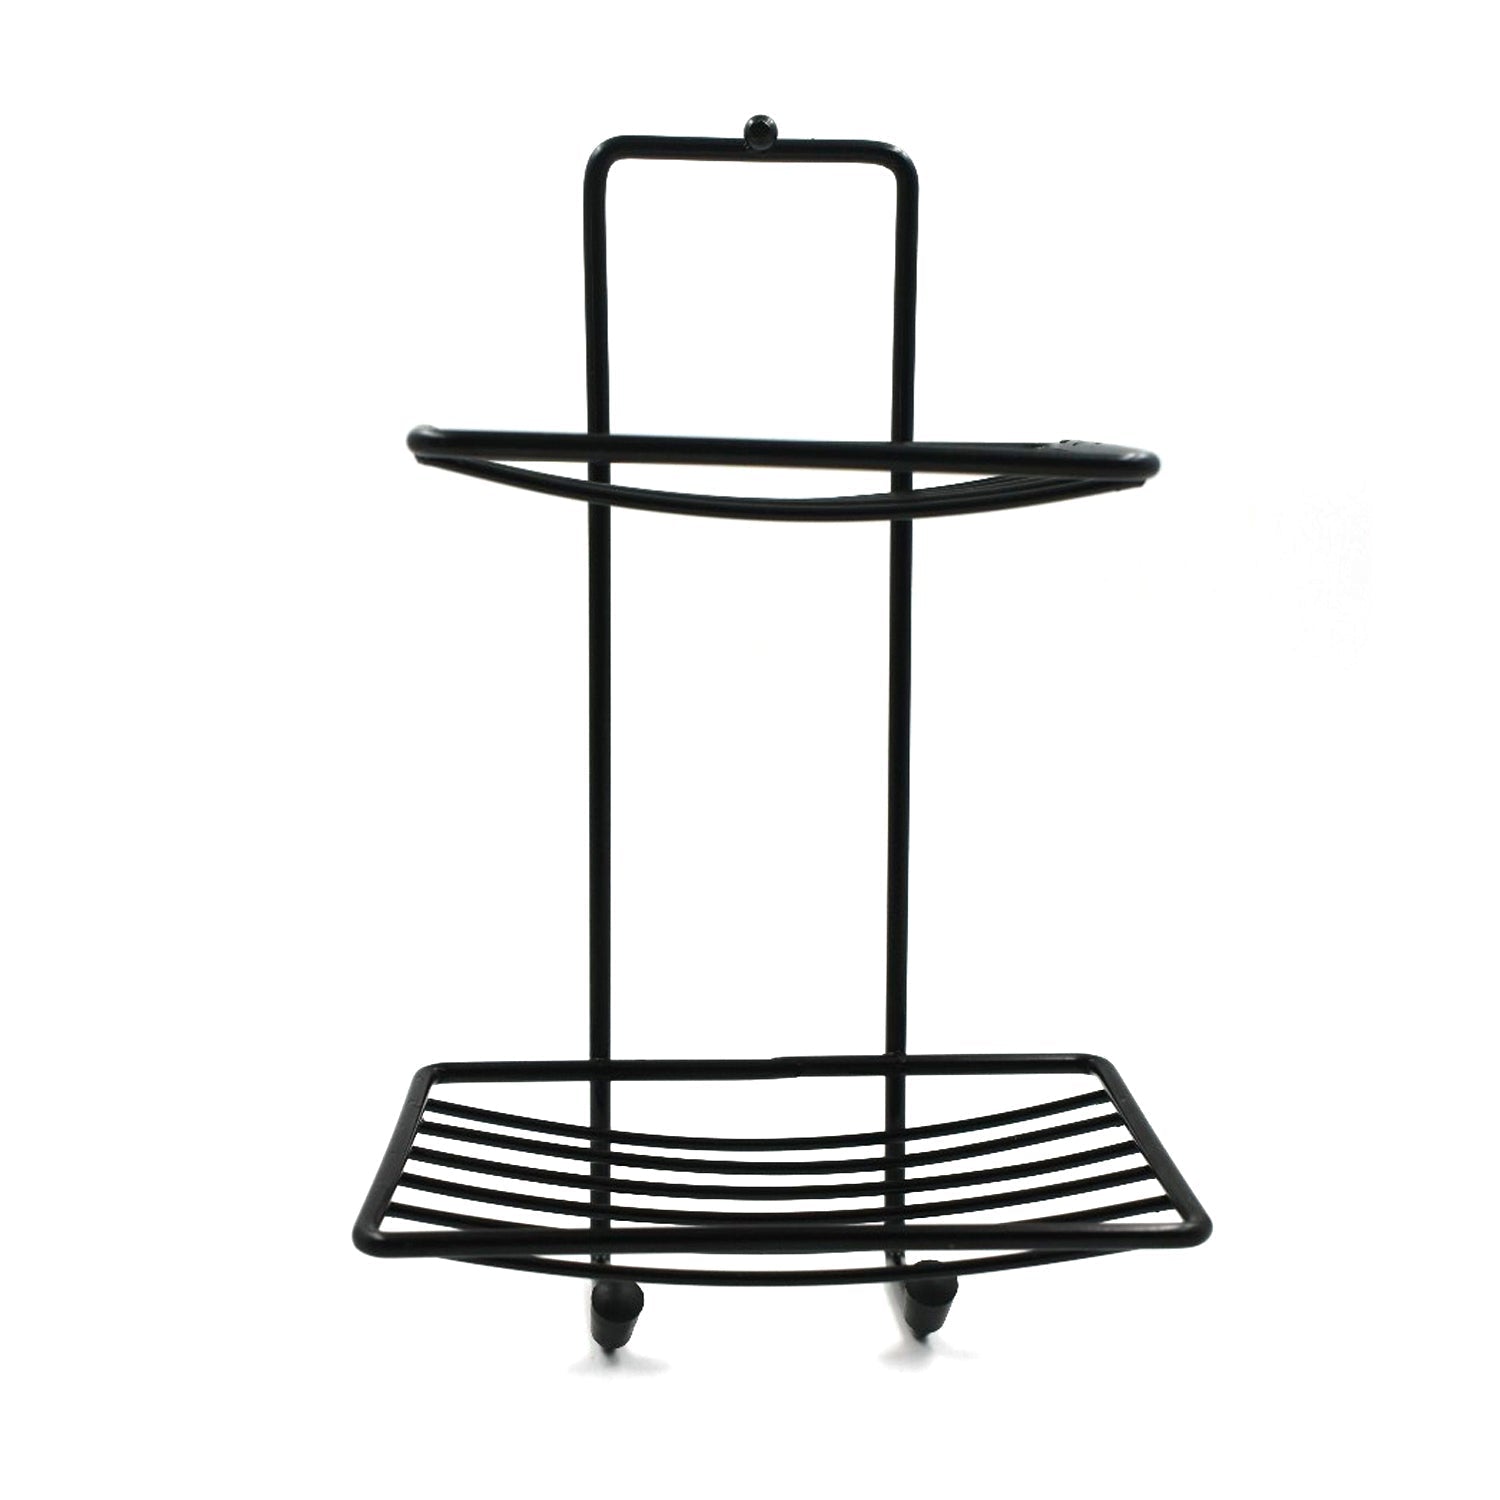 1763A 2 Layer SS Soap Rack used in all kinds of places household and bathroom purposes for holding soaps.